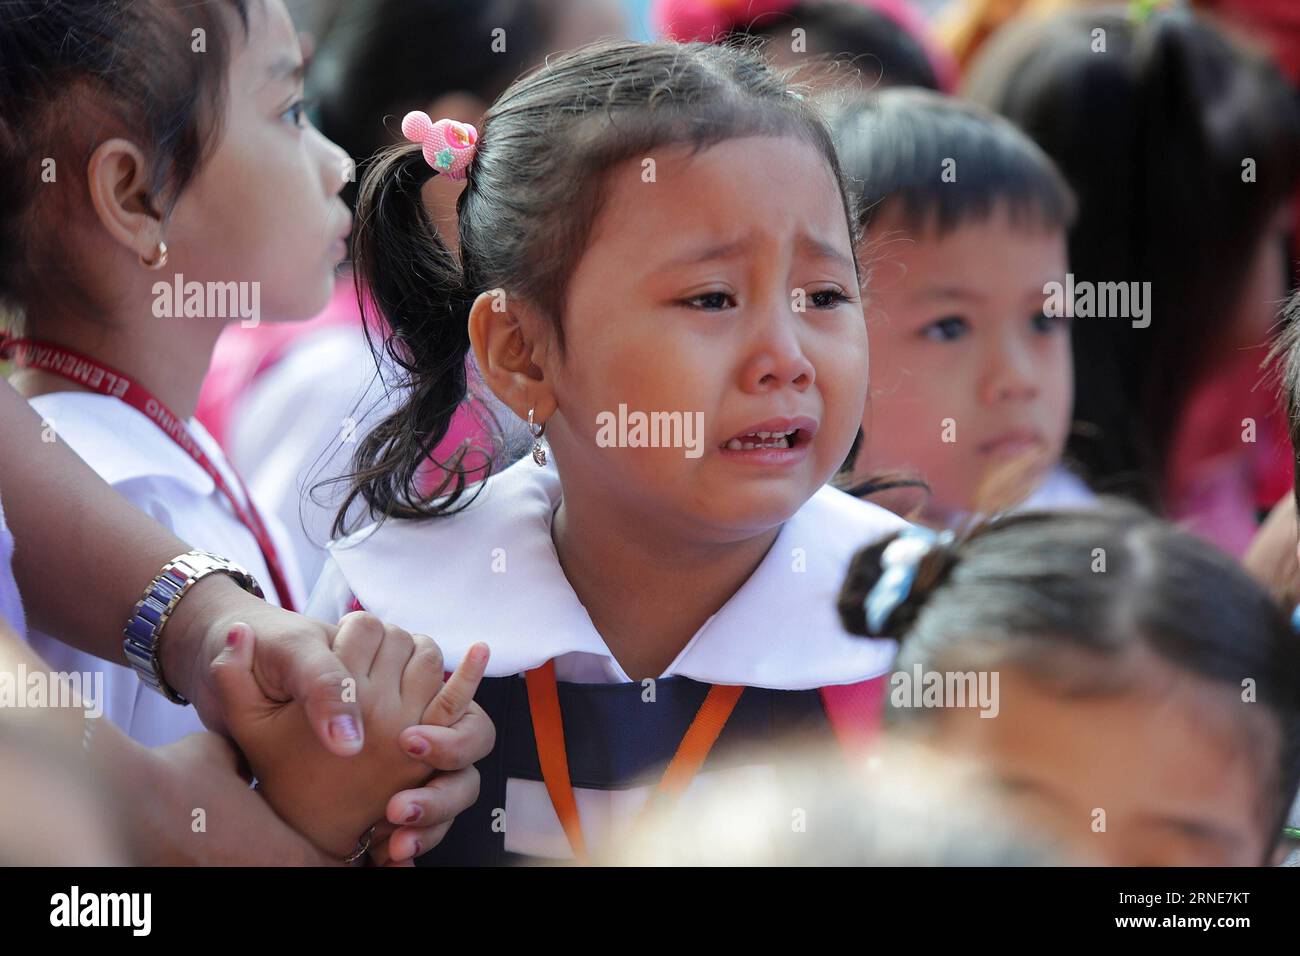 (160613) -- QUEZON CITY (THE PHILIPPINES), June 13, 2016 -- A student cries during the first day of school at the President Corazon Aquino Elementary School in Quezon City, the Philippines, on June 13, 2016. Around 25 million students attended elementary and high school classes all over the country at the beginning of the school year 2016-2017, according to the Philippine Department of Education. ) THE PHILIPPINES-QUEZON CITY-FIRST DAY OF SCHOOL RouellexUmali PUBLICATIONxNOTxINxCHN   160613 Quezon City The Philippines June 13 2016 a Student cries during The First Day of School AT The President Stock Photo